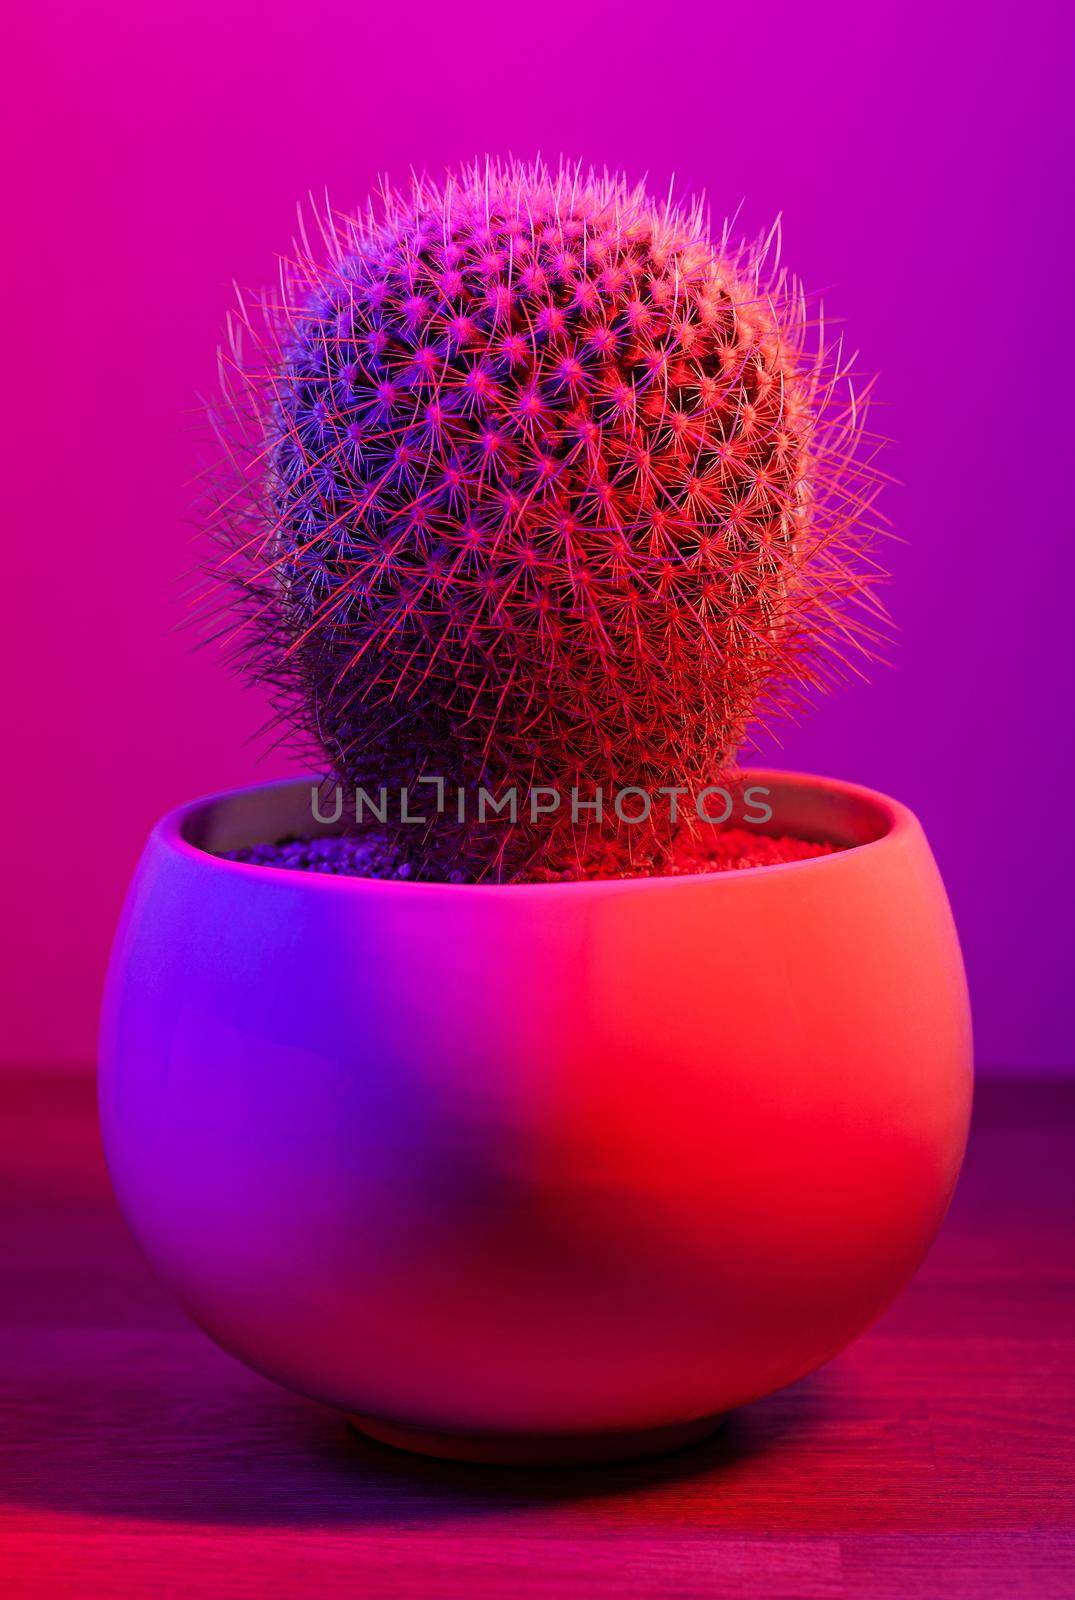 Potted round shaped cactus on dark pink background. Illuminated in red and blue.